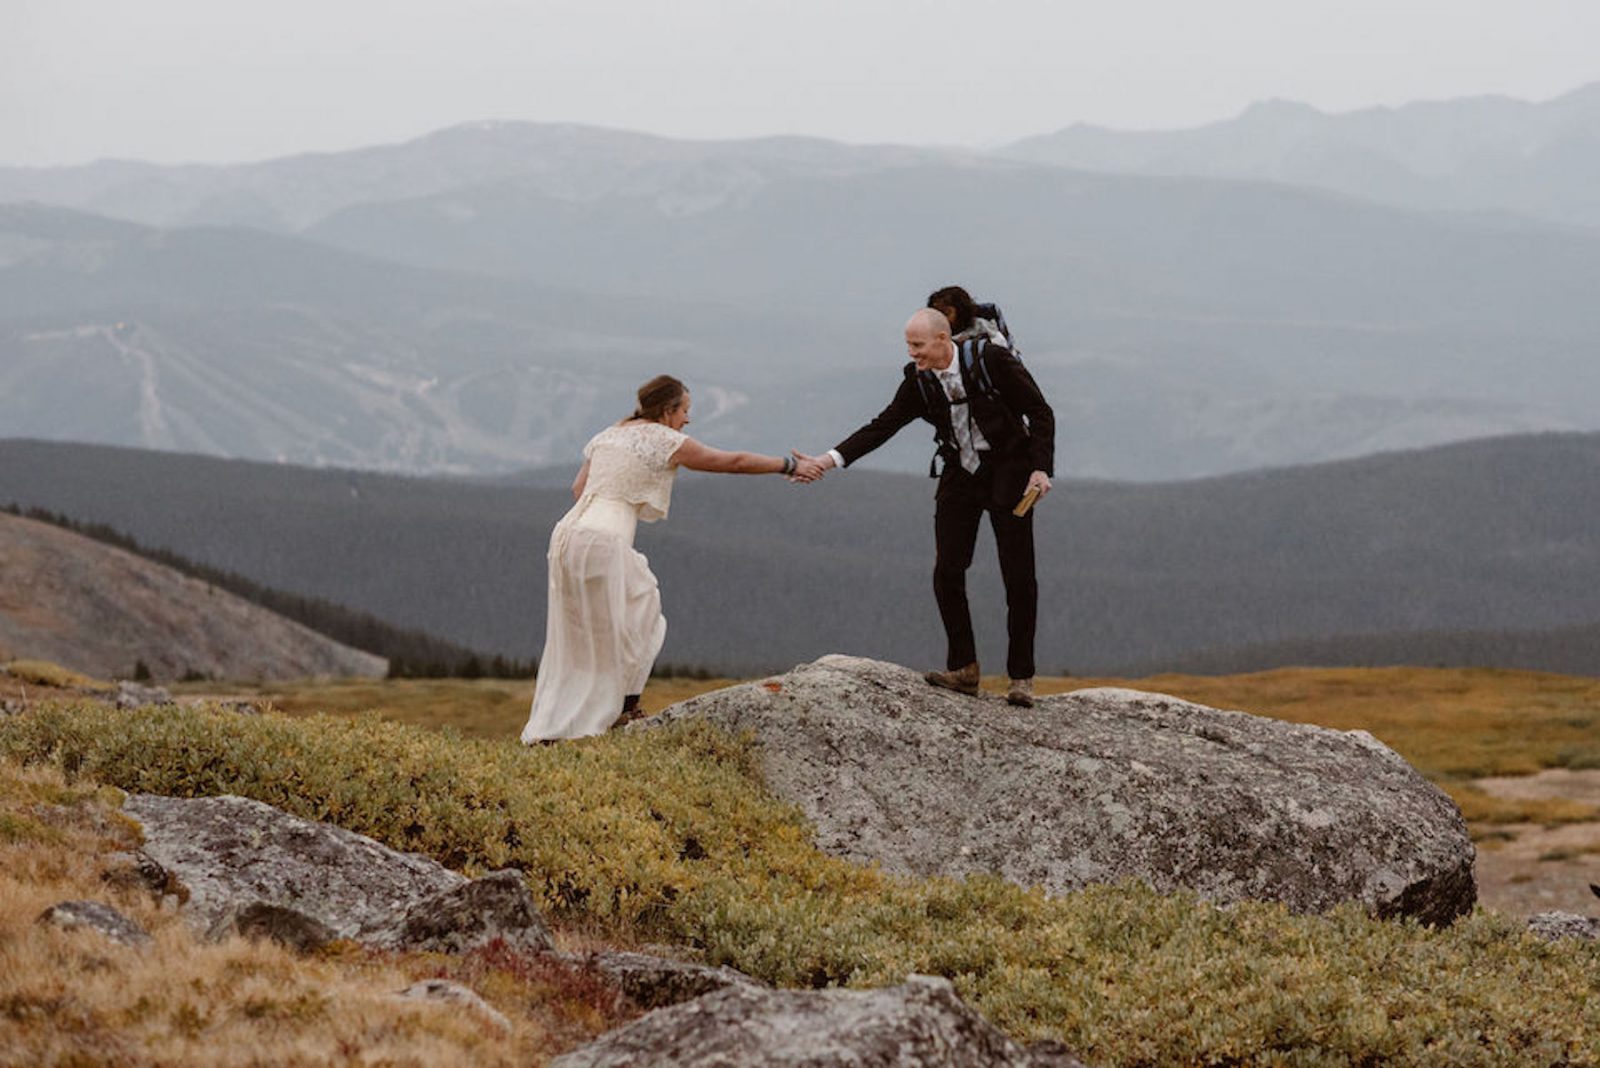 private elopement in the mountains wedding dress